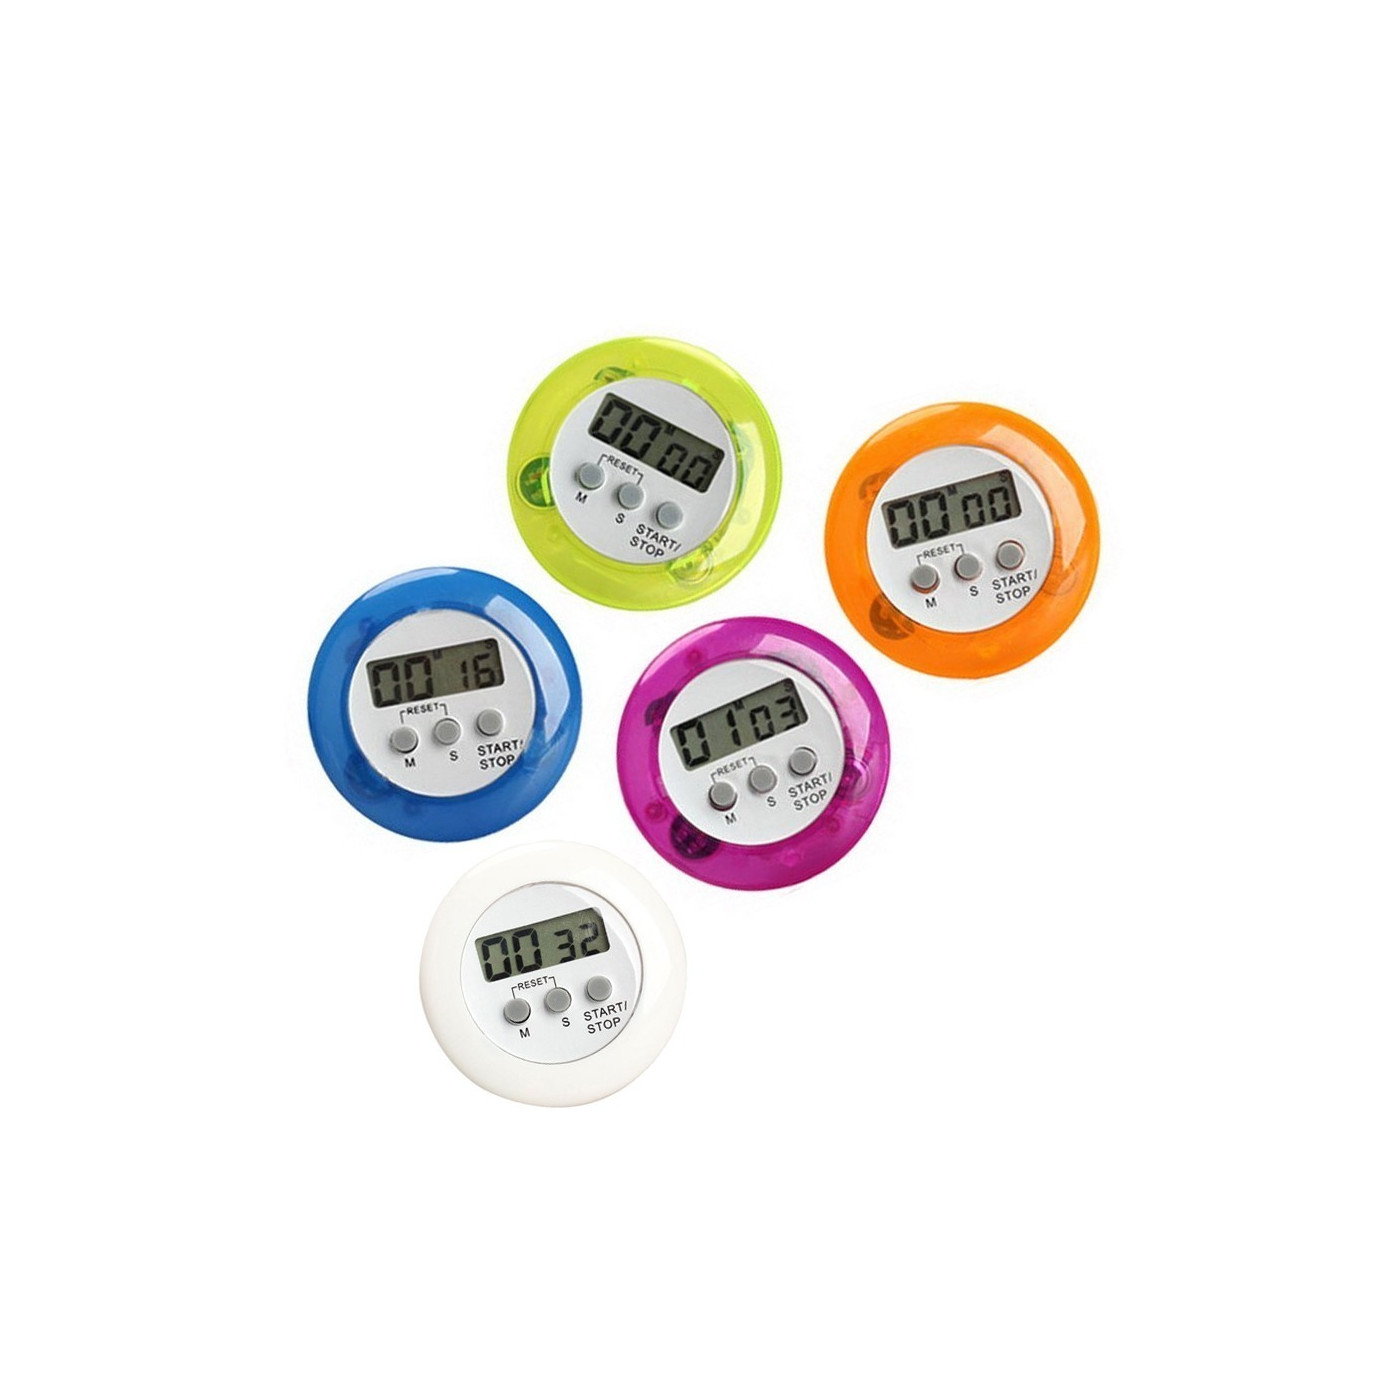 COLOUR WORKS ELECTRONIC Kitchen TIMER blue